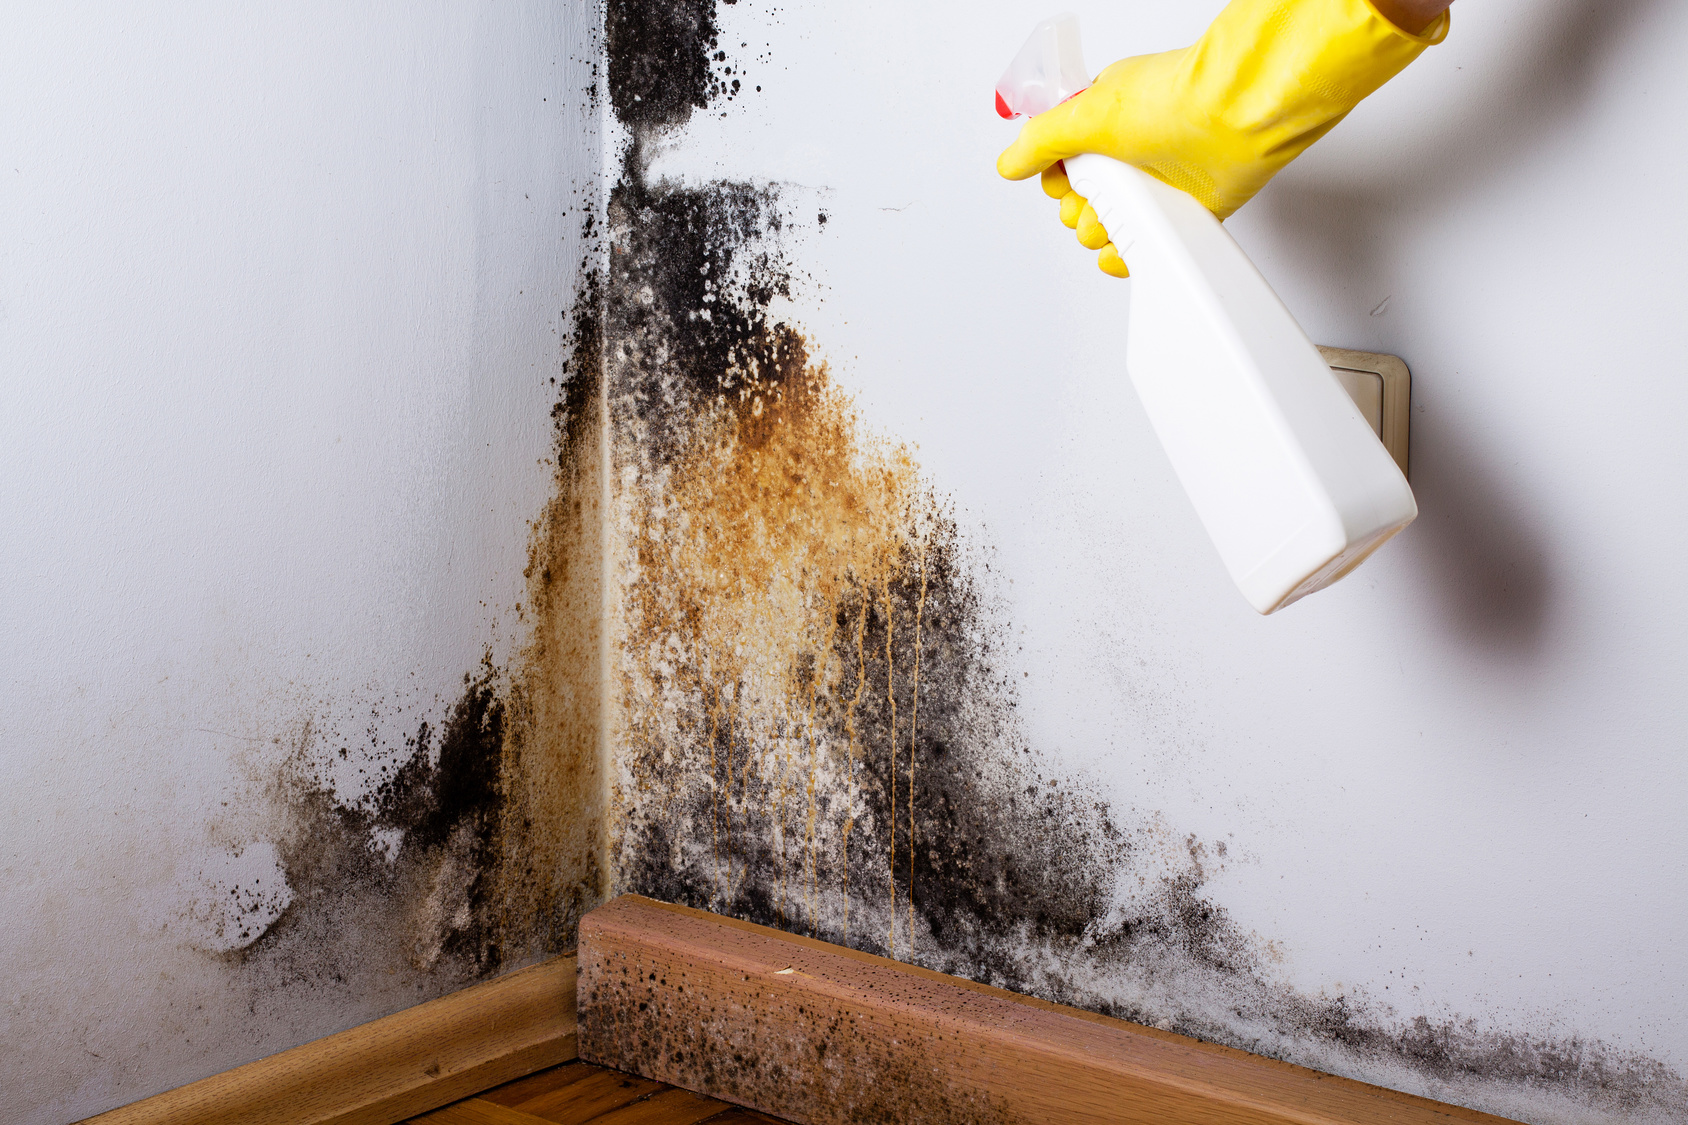 Appliances that Commonly Experience Mold Growth